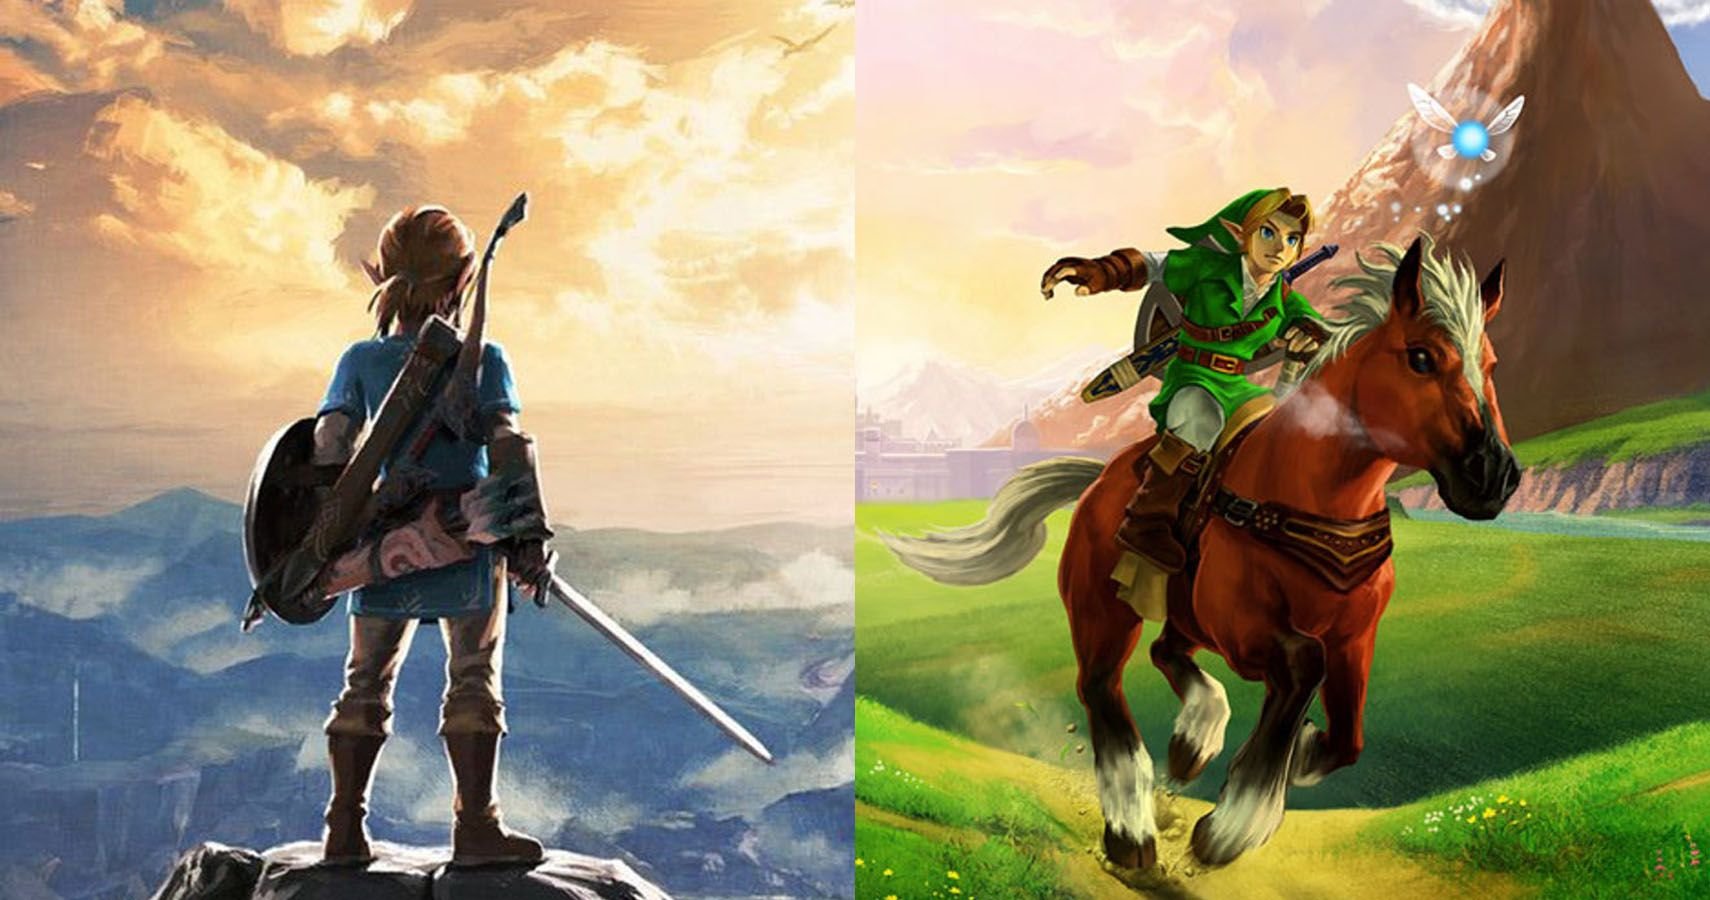 Ocarina Of Time vs Breath Of The Wild: Which Game Is Actually Better?